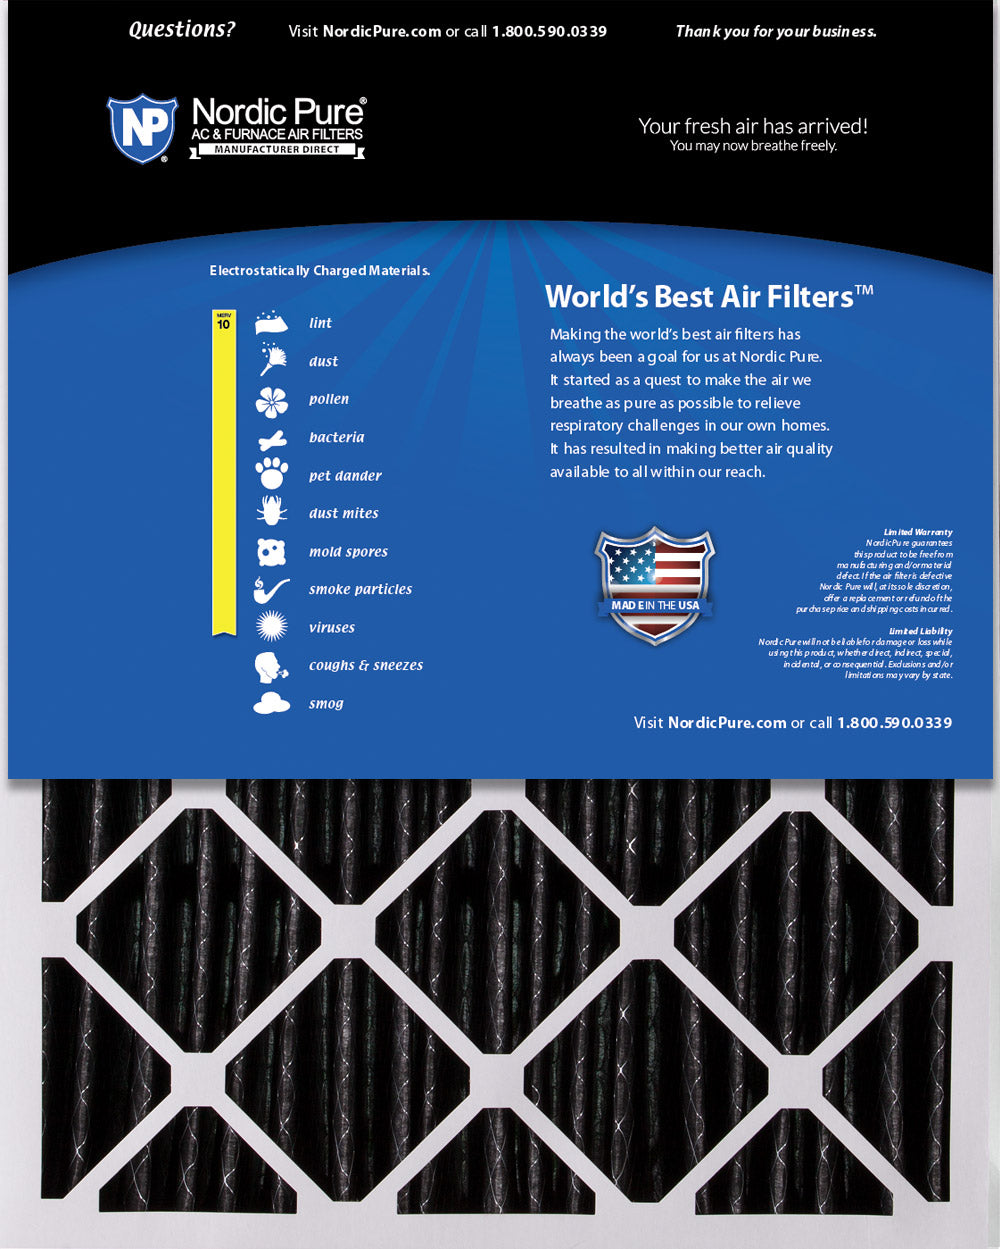 20x25x5 (4 3/8) Honeywell/Lennox Replacement Air Filters MERV 10 Pleated Plus Carbon